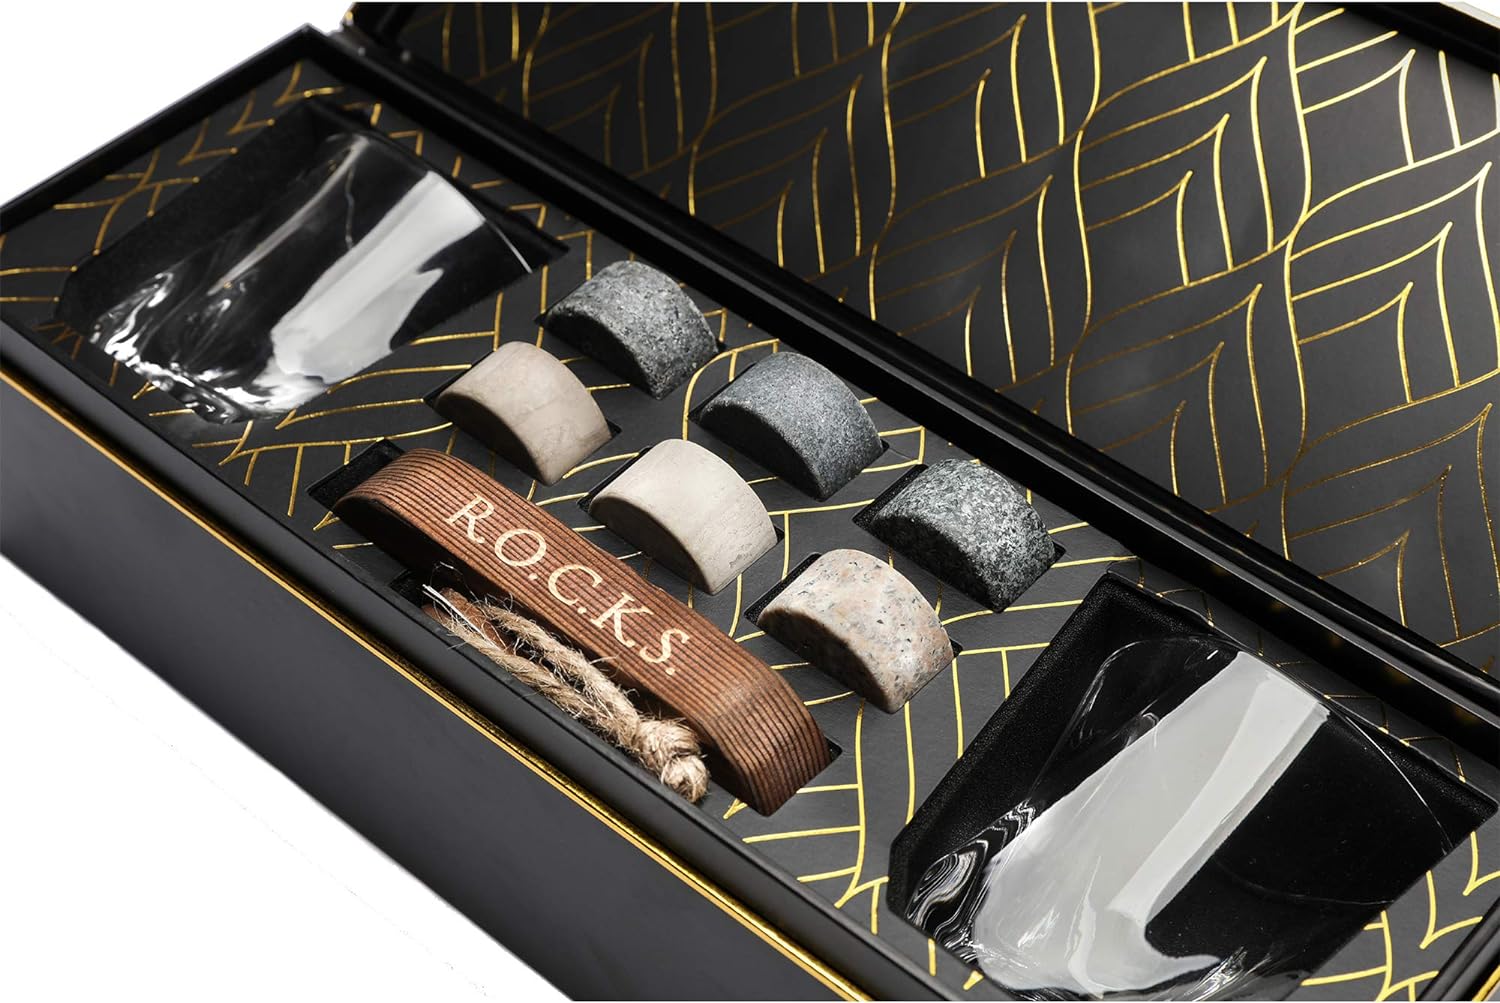 Whiskey Chilling Stones Gift Set - 6 Handcrafted Premium Granite Round Sipping Rocks - 2 Crystal Superior Glasses - Hardwood Presentation & Storage Tray - Elegant Gold Foil Gift Box by R.O.C.K.S.